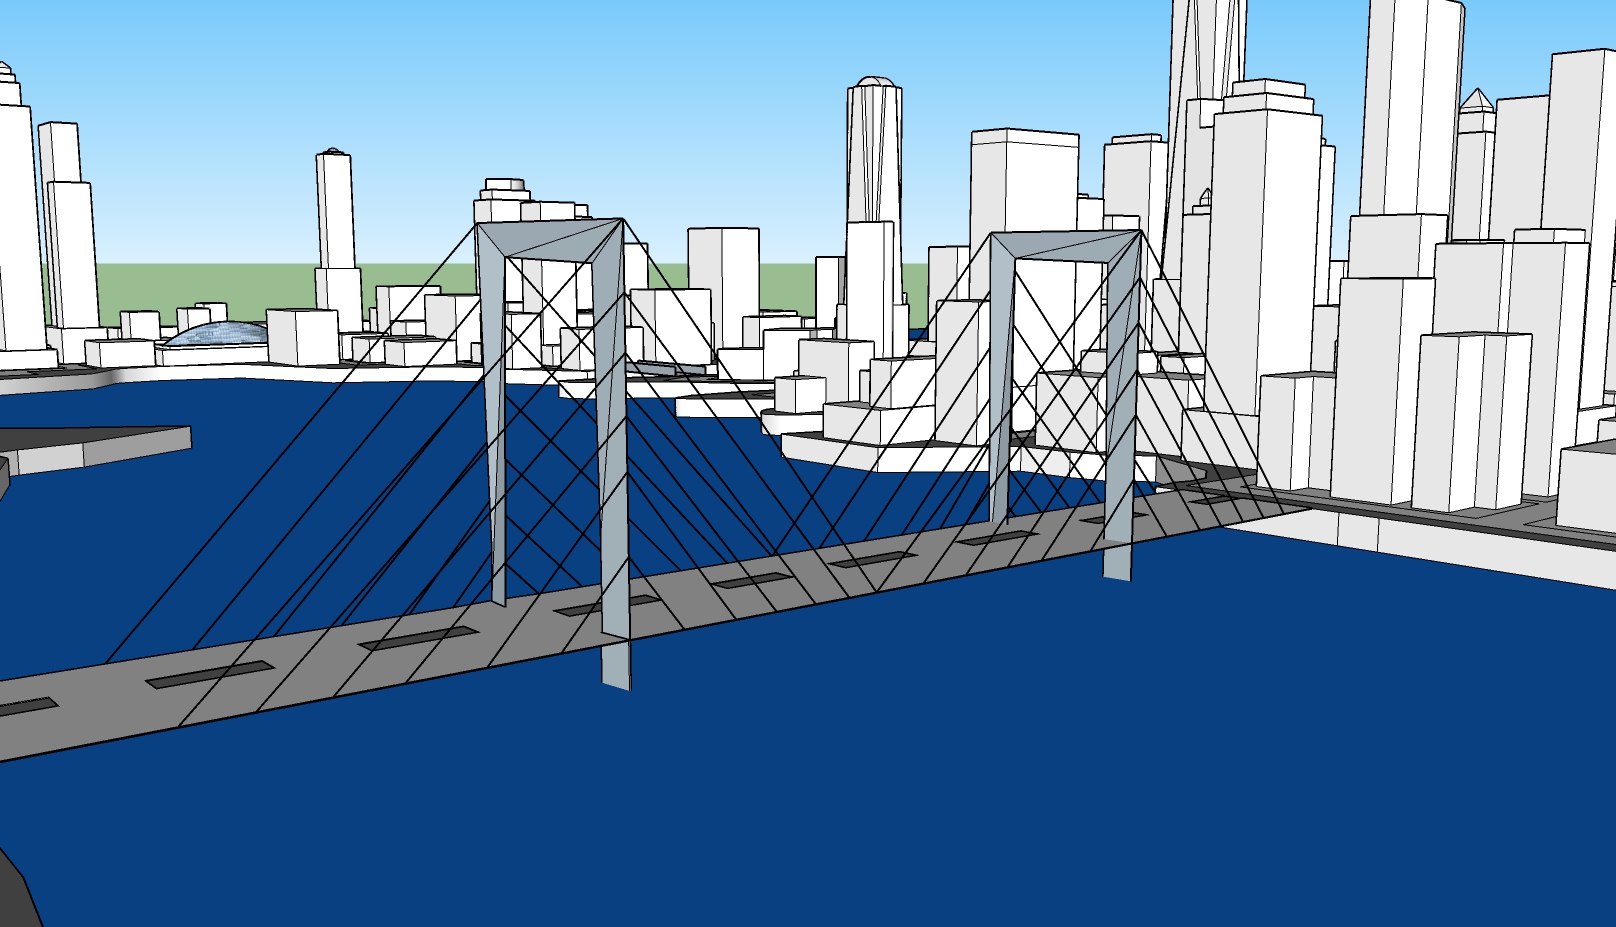 Digital model of a cable stayed bridge over water